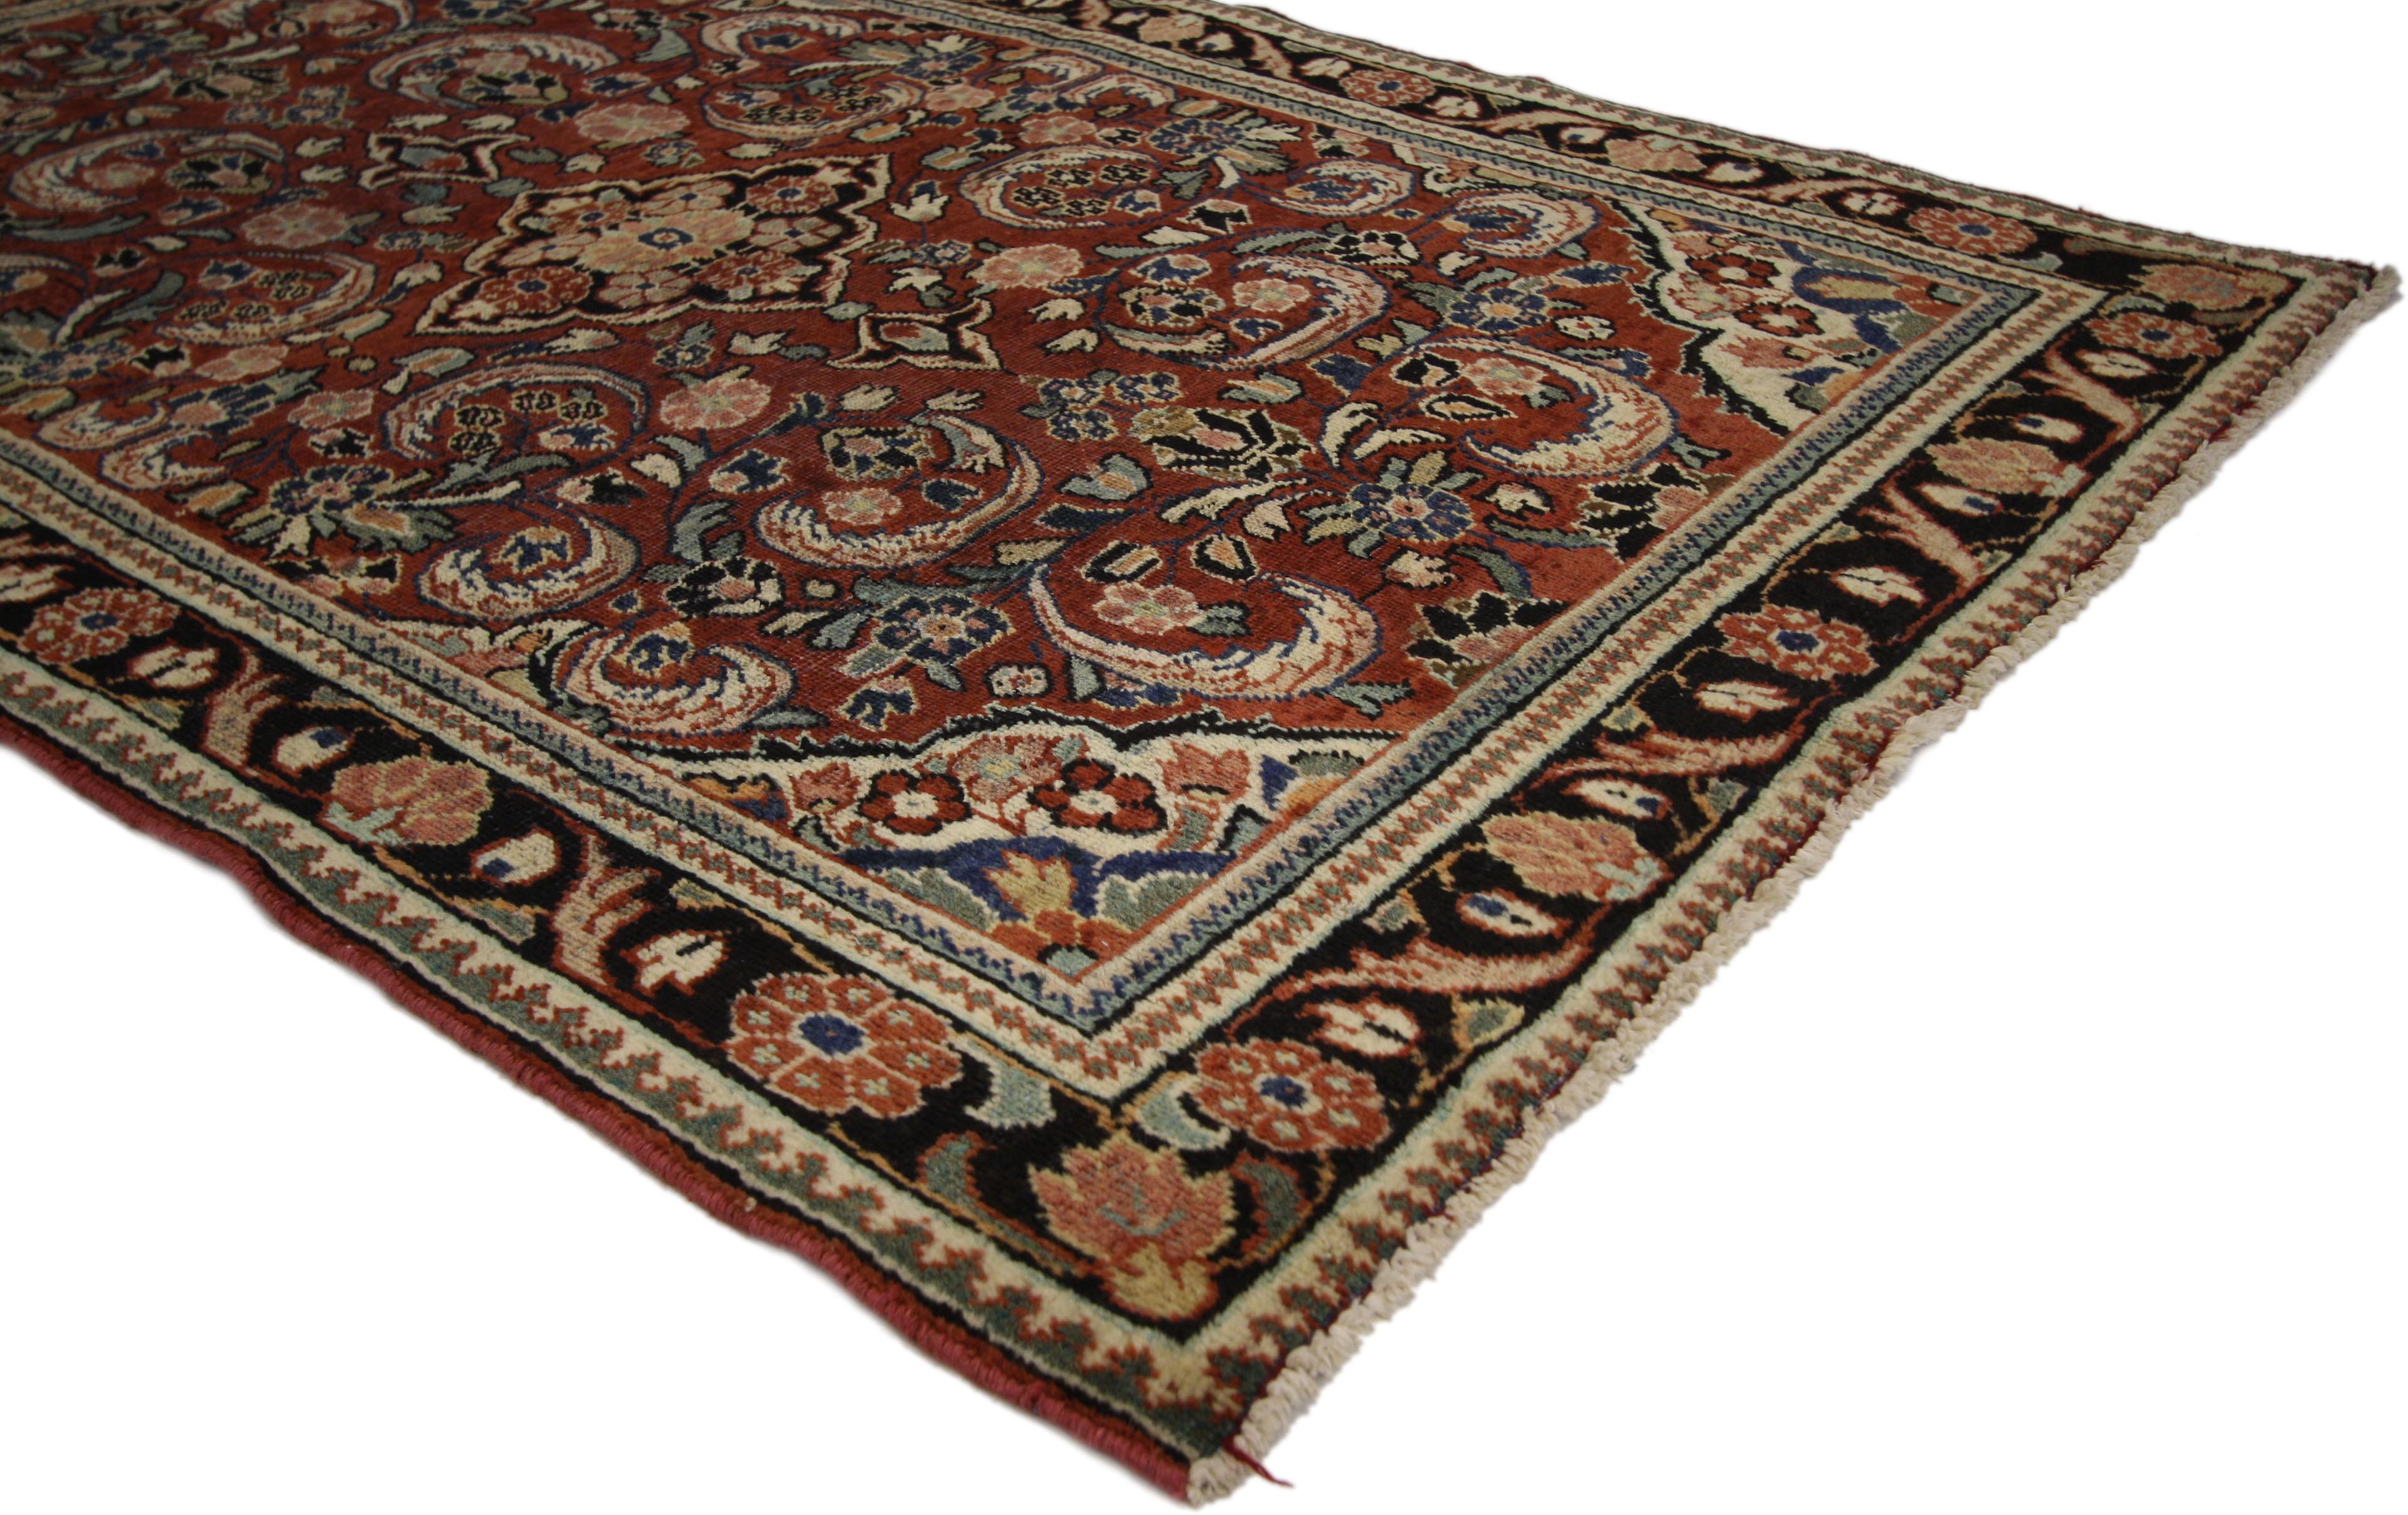 75187 Vintage Persian Mahal Rug with English Traditional Style 04'05 x 06'10. This hand-knotted wool vintage Persian Mahal accent rug with traditional style features a small cusped central medallion floating on an abrashed field surrounded by